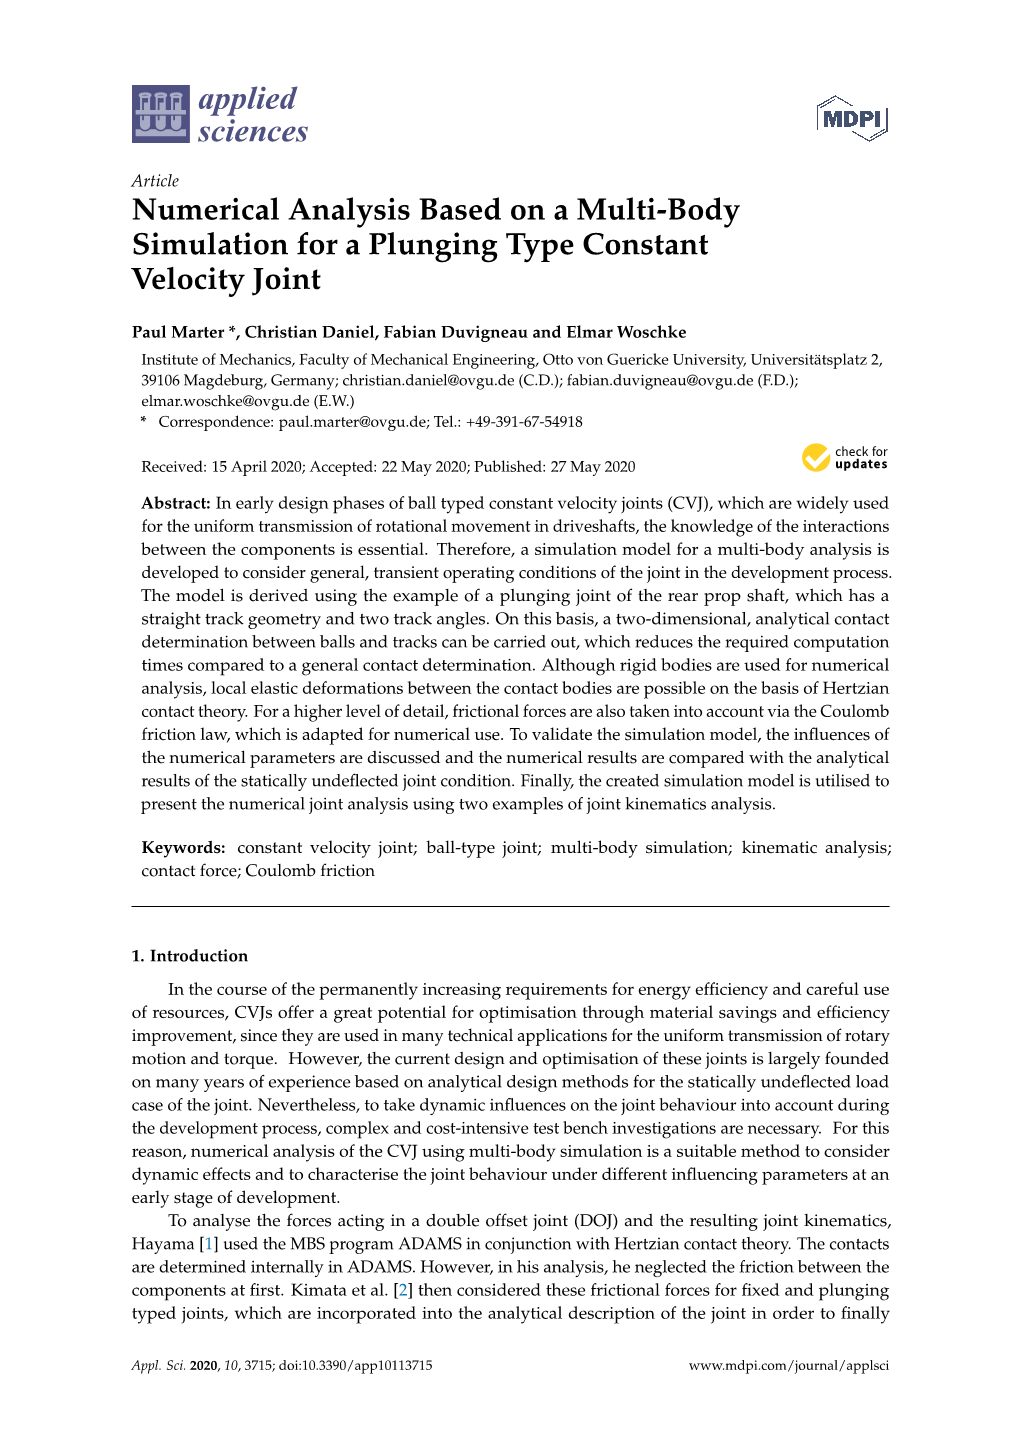 Numerical Analysis Based on a Multi-Body Simulation for a Plunging Type Constant Velocity Joint